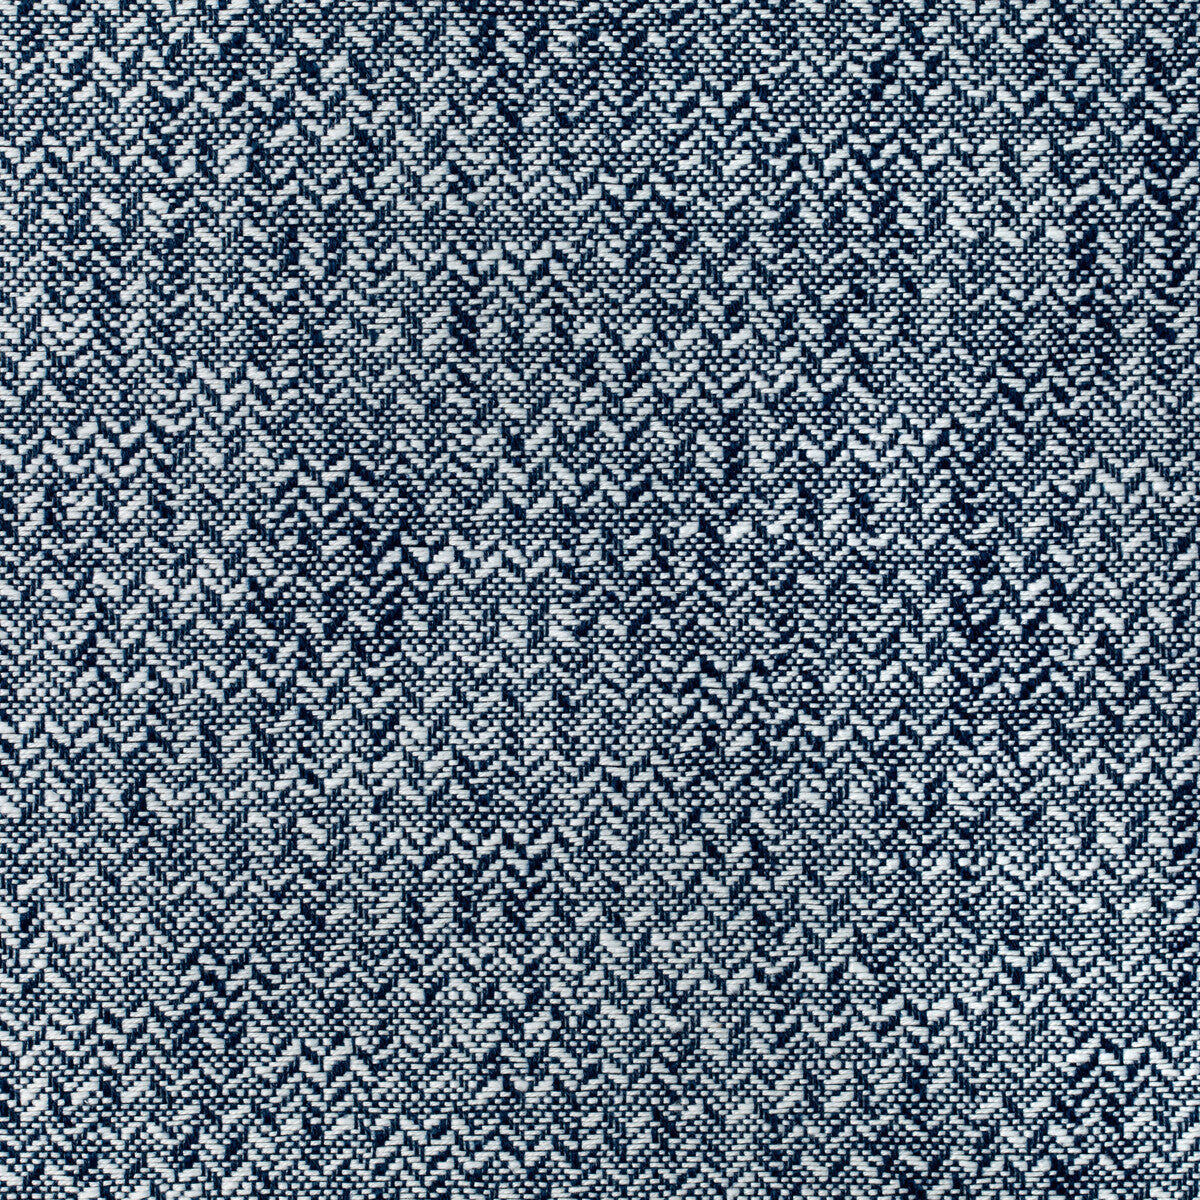 Kravet Design fabric in 36089-51 color - pattern 36089.51.0 - by Kravet Design in the Inside Out Performance Fabrics collection